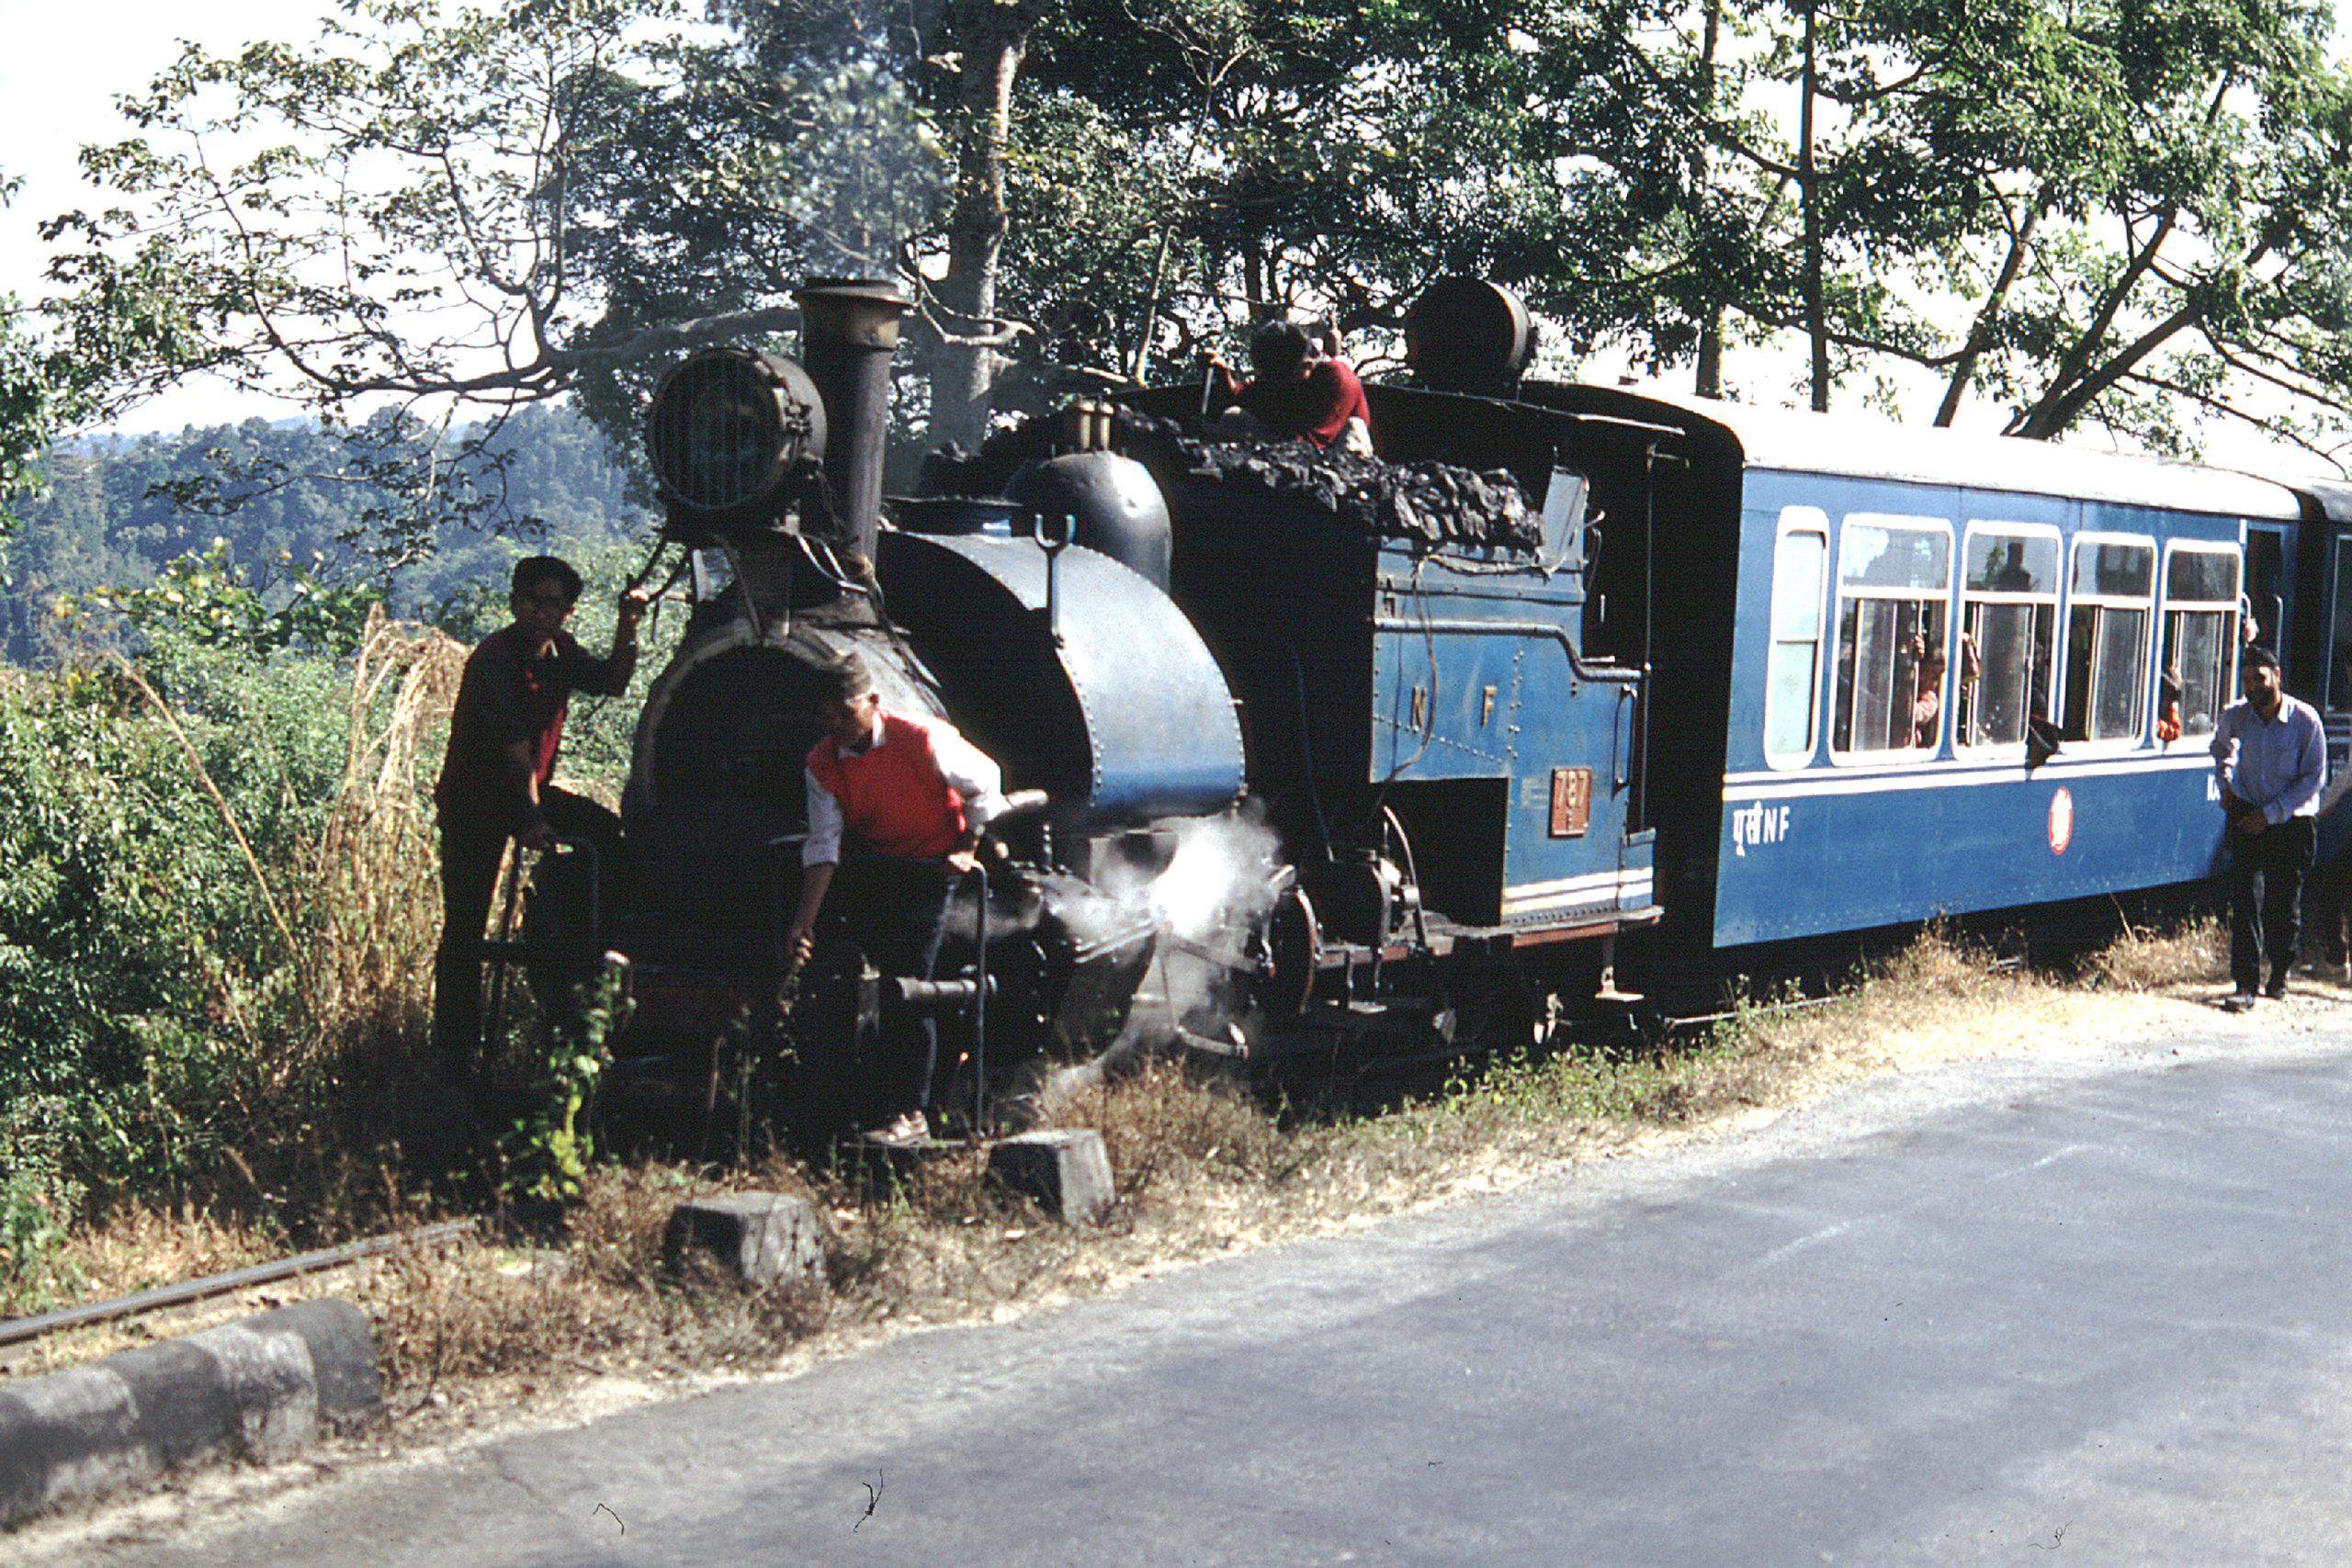 Darjeeling train with loco No. 787 28th November 1992

Photo by: Kevin Hughes. <a href="https://photo.rcts.org.uk/" target="_blank" rel="noopener">RCTS Collection</a>